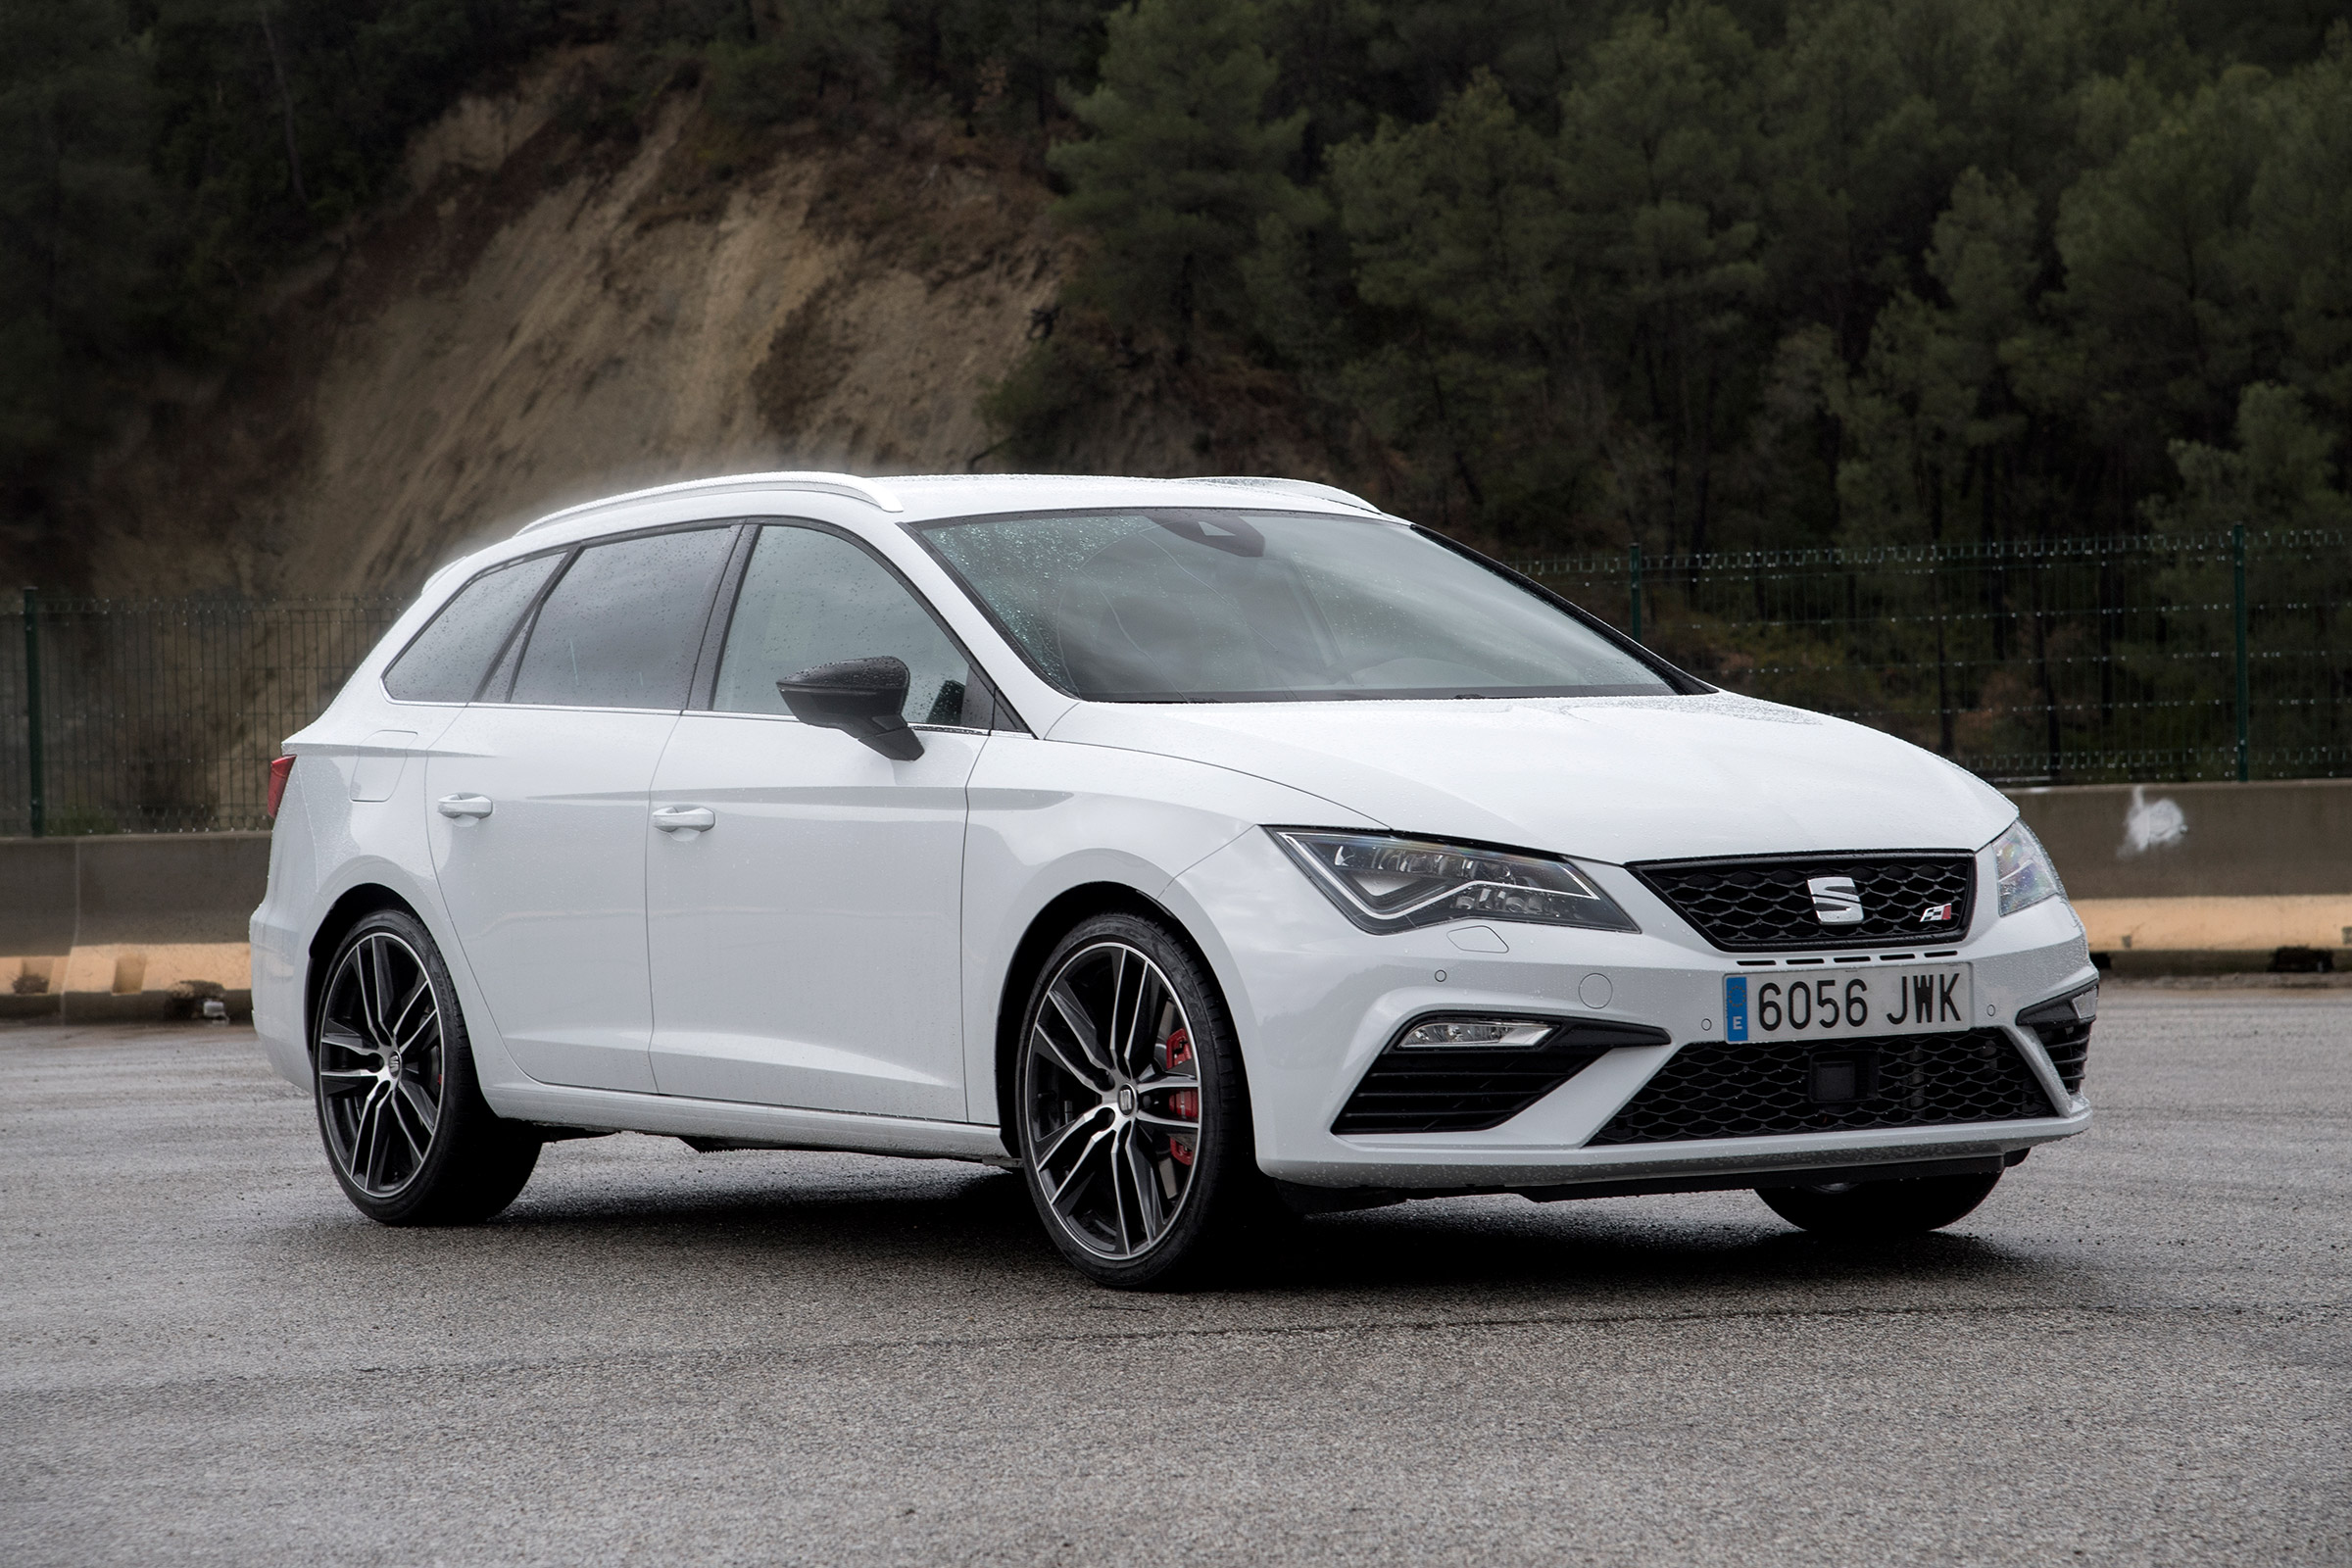 MOTORING REVIEW: Cupra Leon is performance version of SEAT Leon